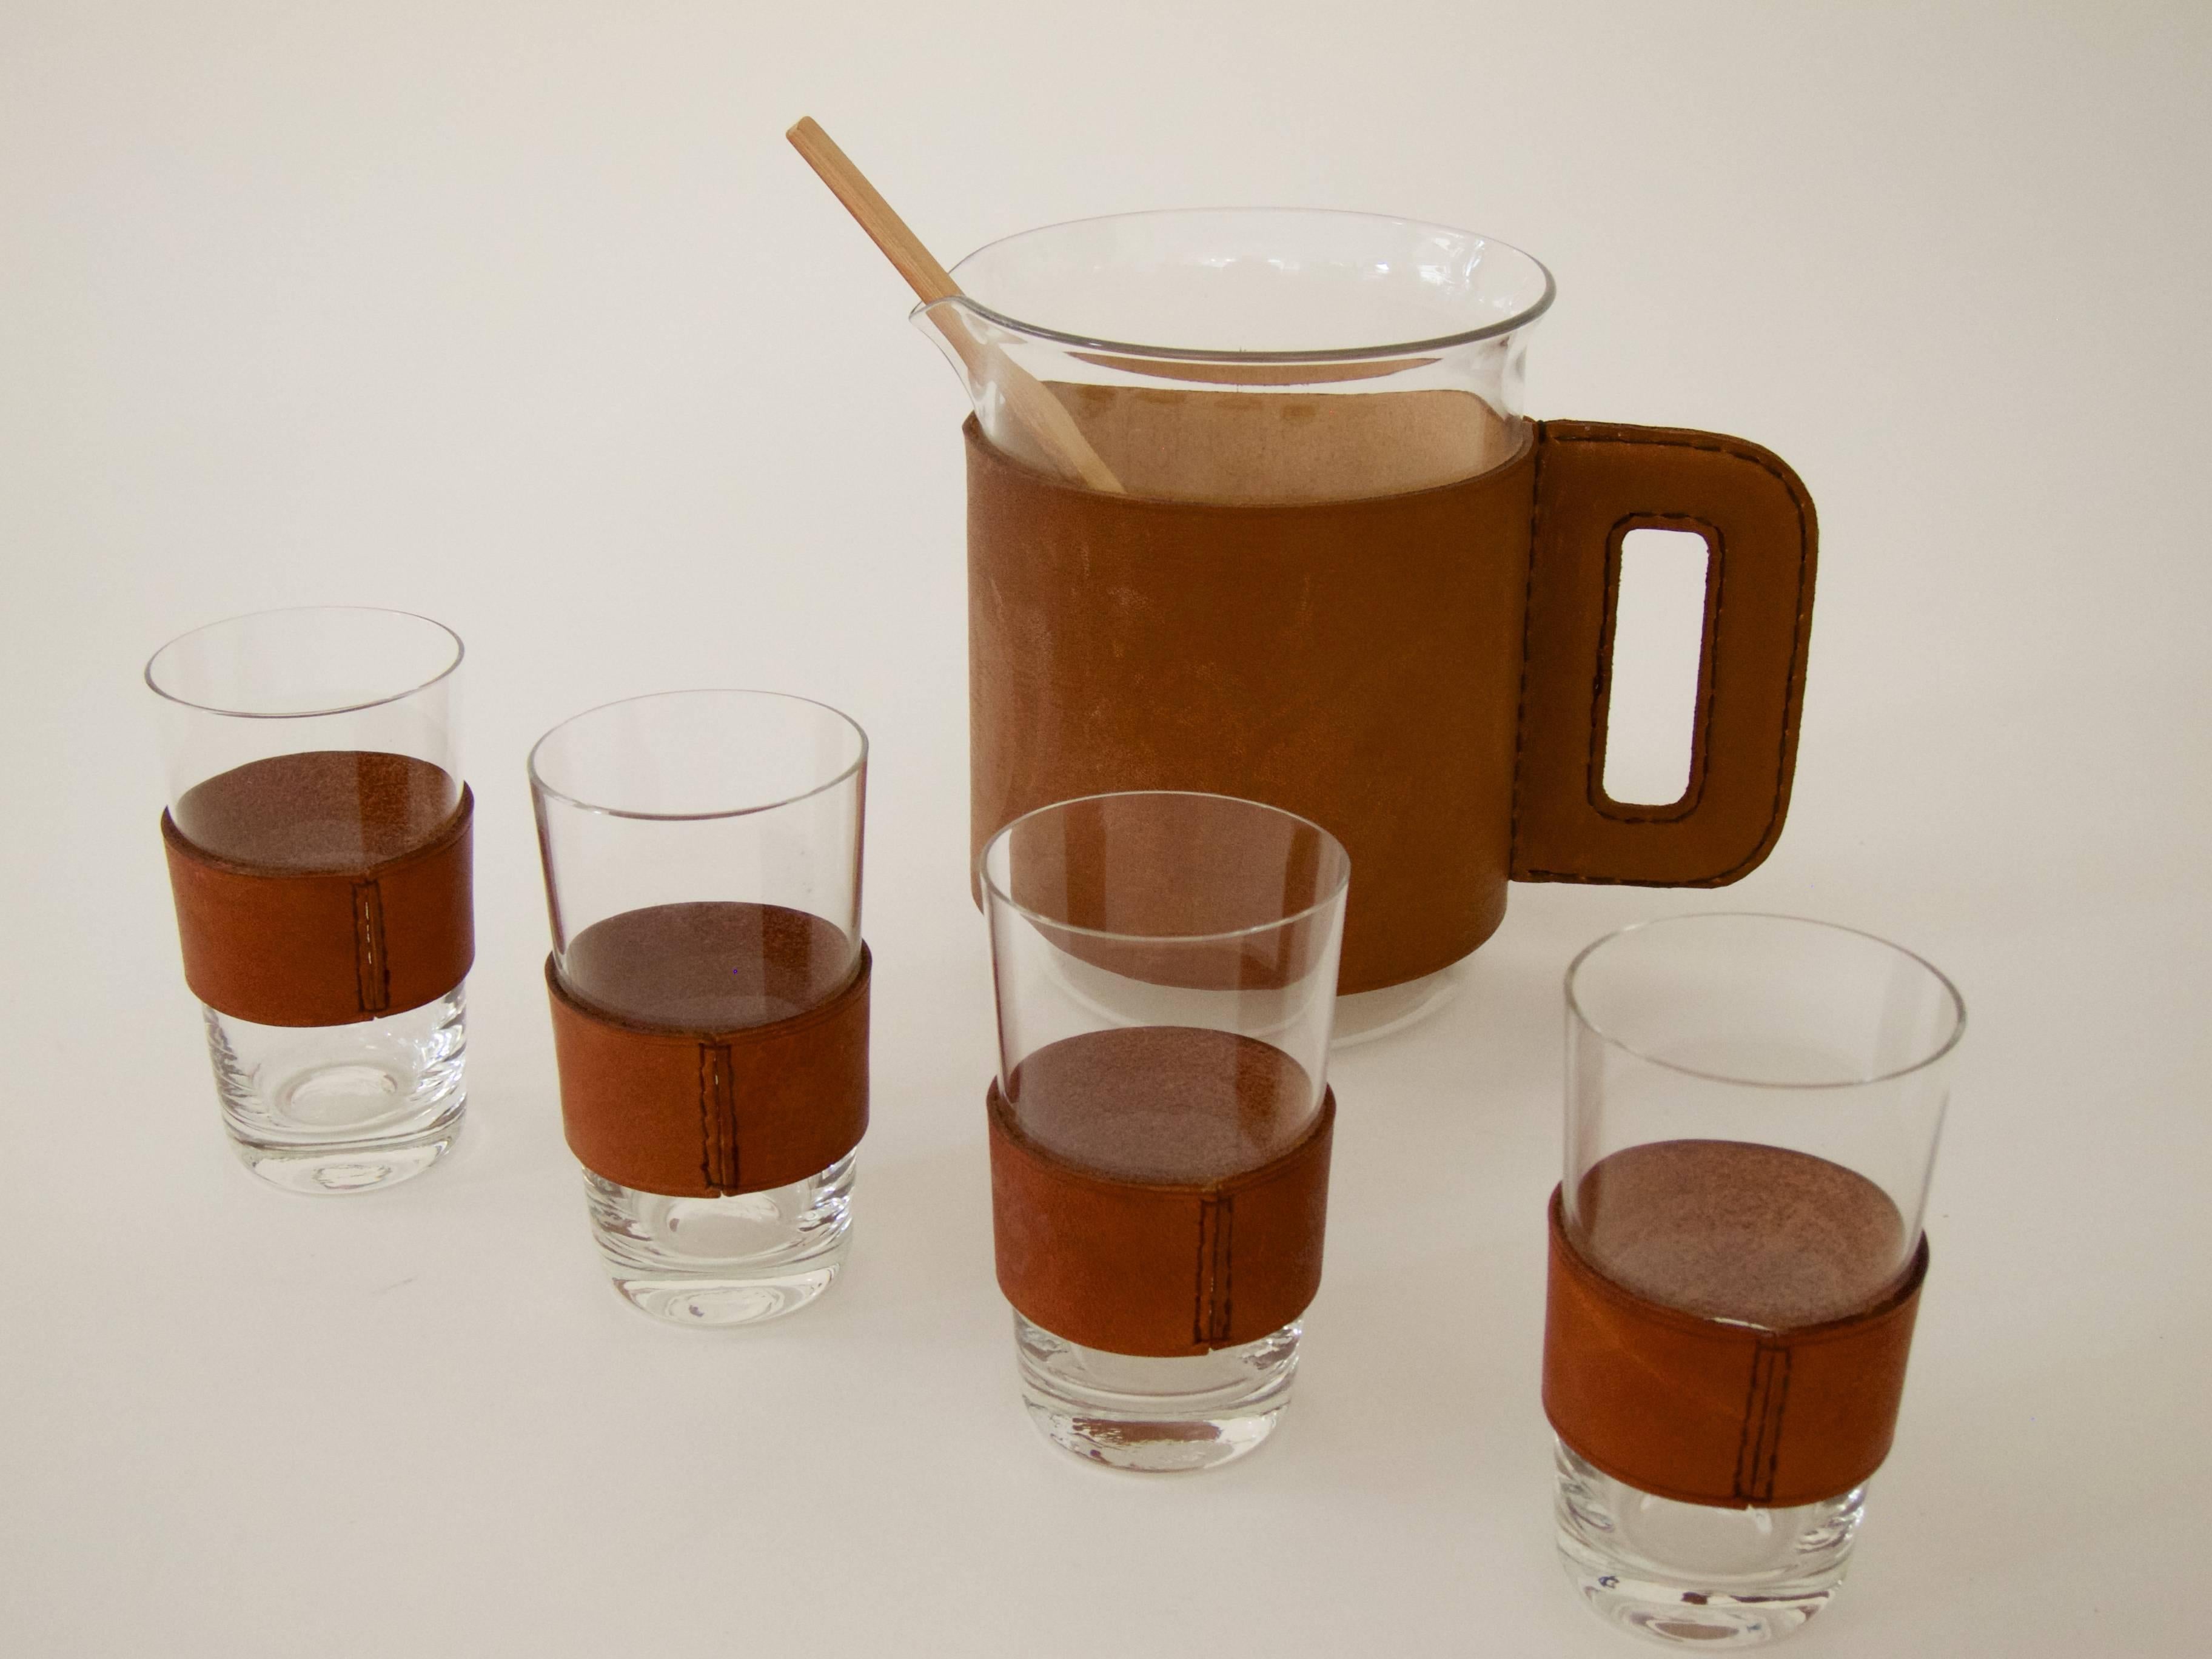 Set of pitcher with four Glasses and a bamboo muddler
Handblown glass, leather sleeves (with a leather handle on the pitcher), bamboo muddler
Great condition with nice patinated leather.

Pitcher Ø 11.5 cm, H 14.5 cm
Glasses Ø 5.5 cm, H 9.8